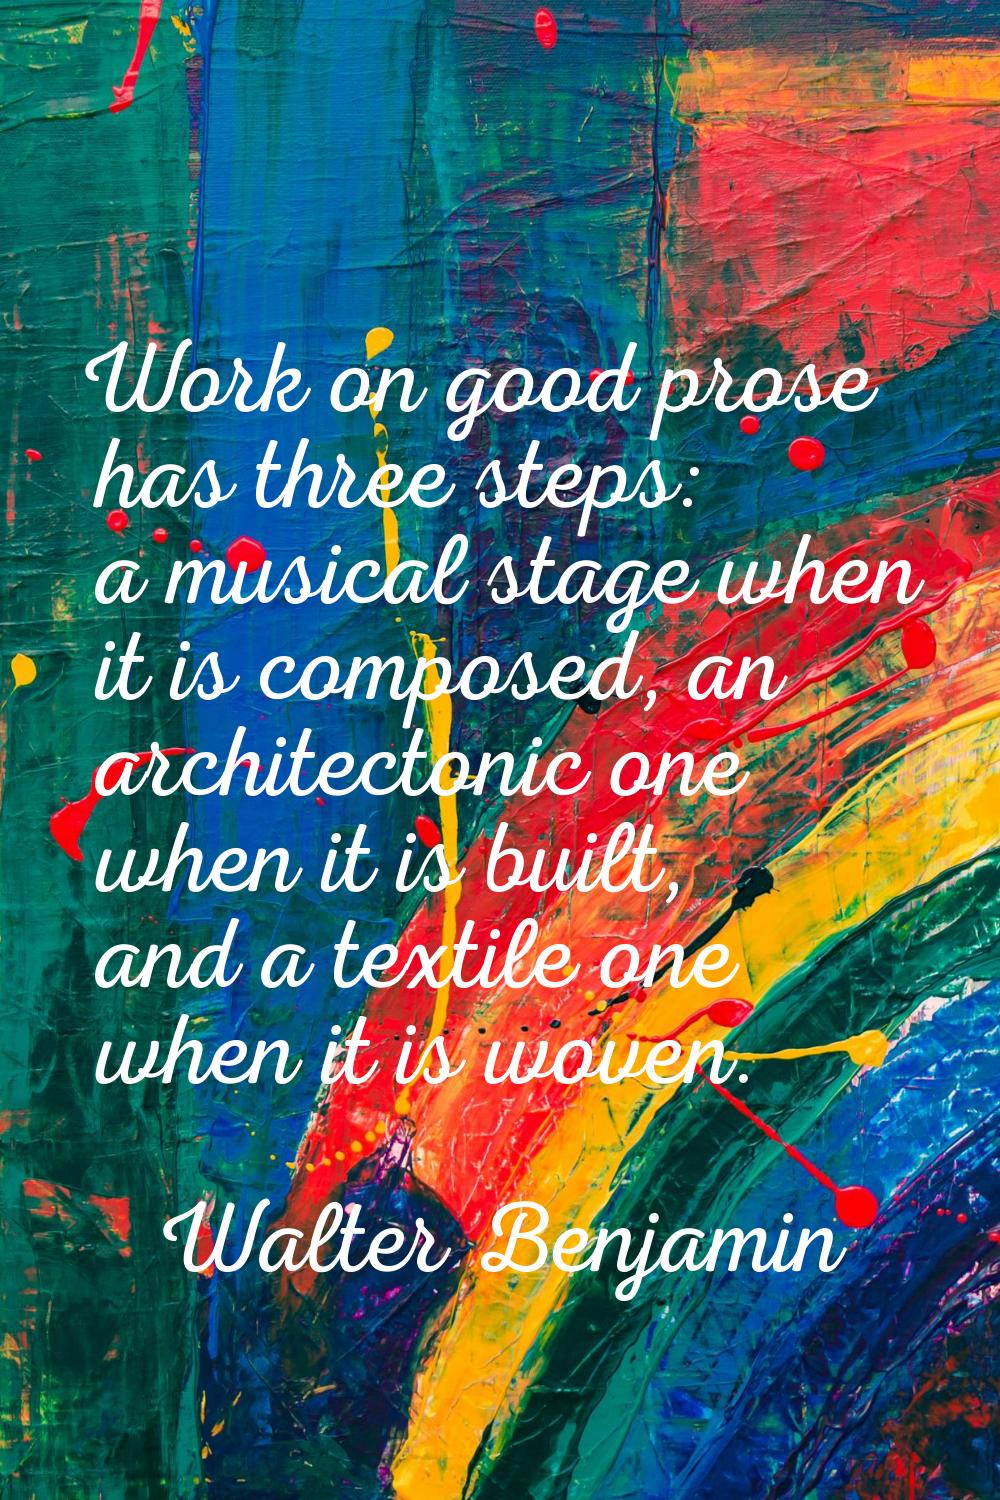 Work on good prose has three steps: a musical stage when it is composed, an architectonic one when 